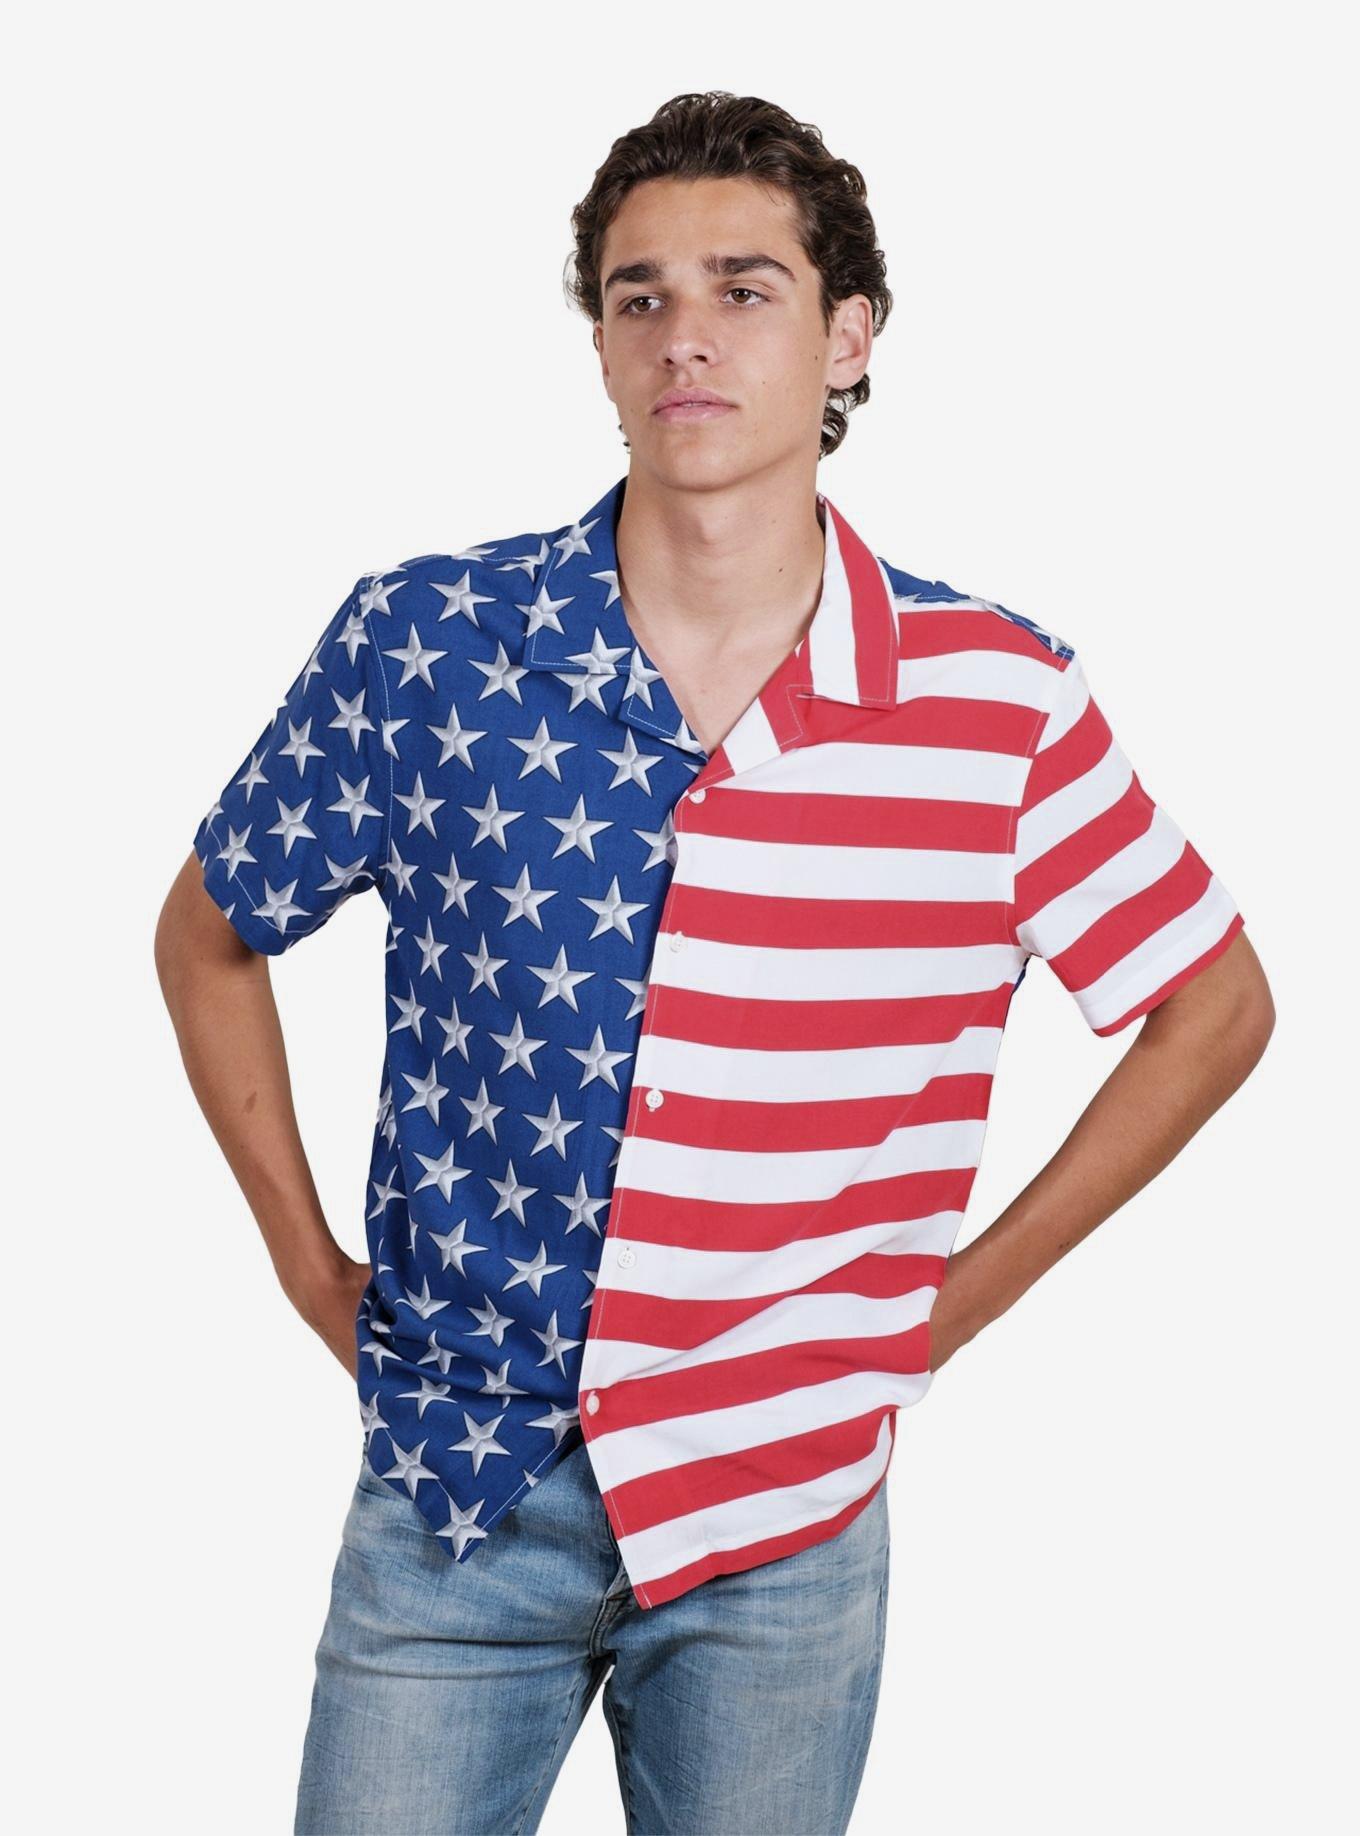 Split Flag Woven Shirt in Red, White, and Blue Button Up, RED  WHITE  BLUE, hi-res